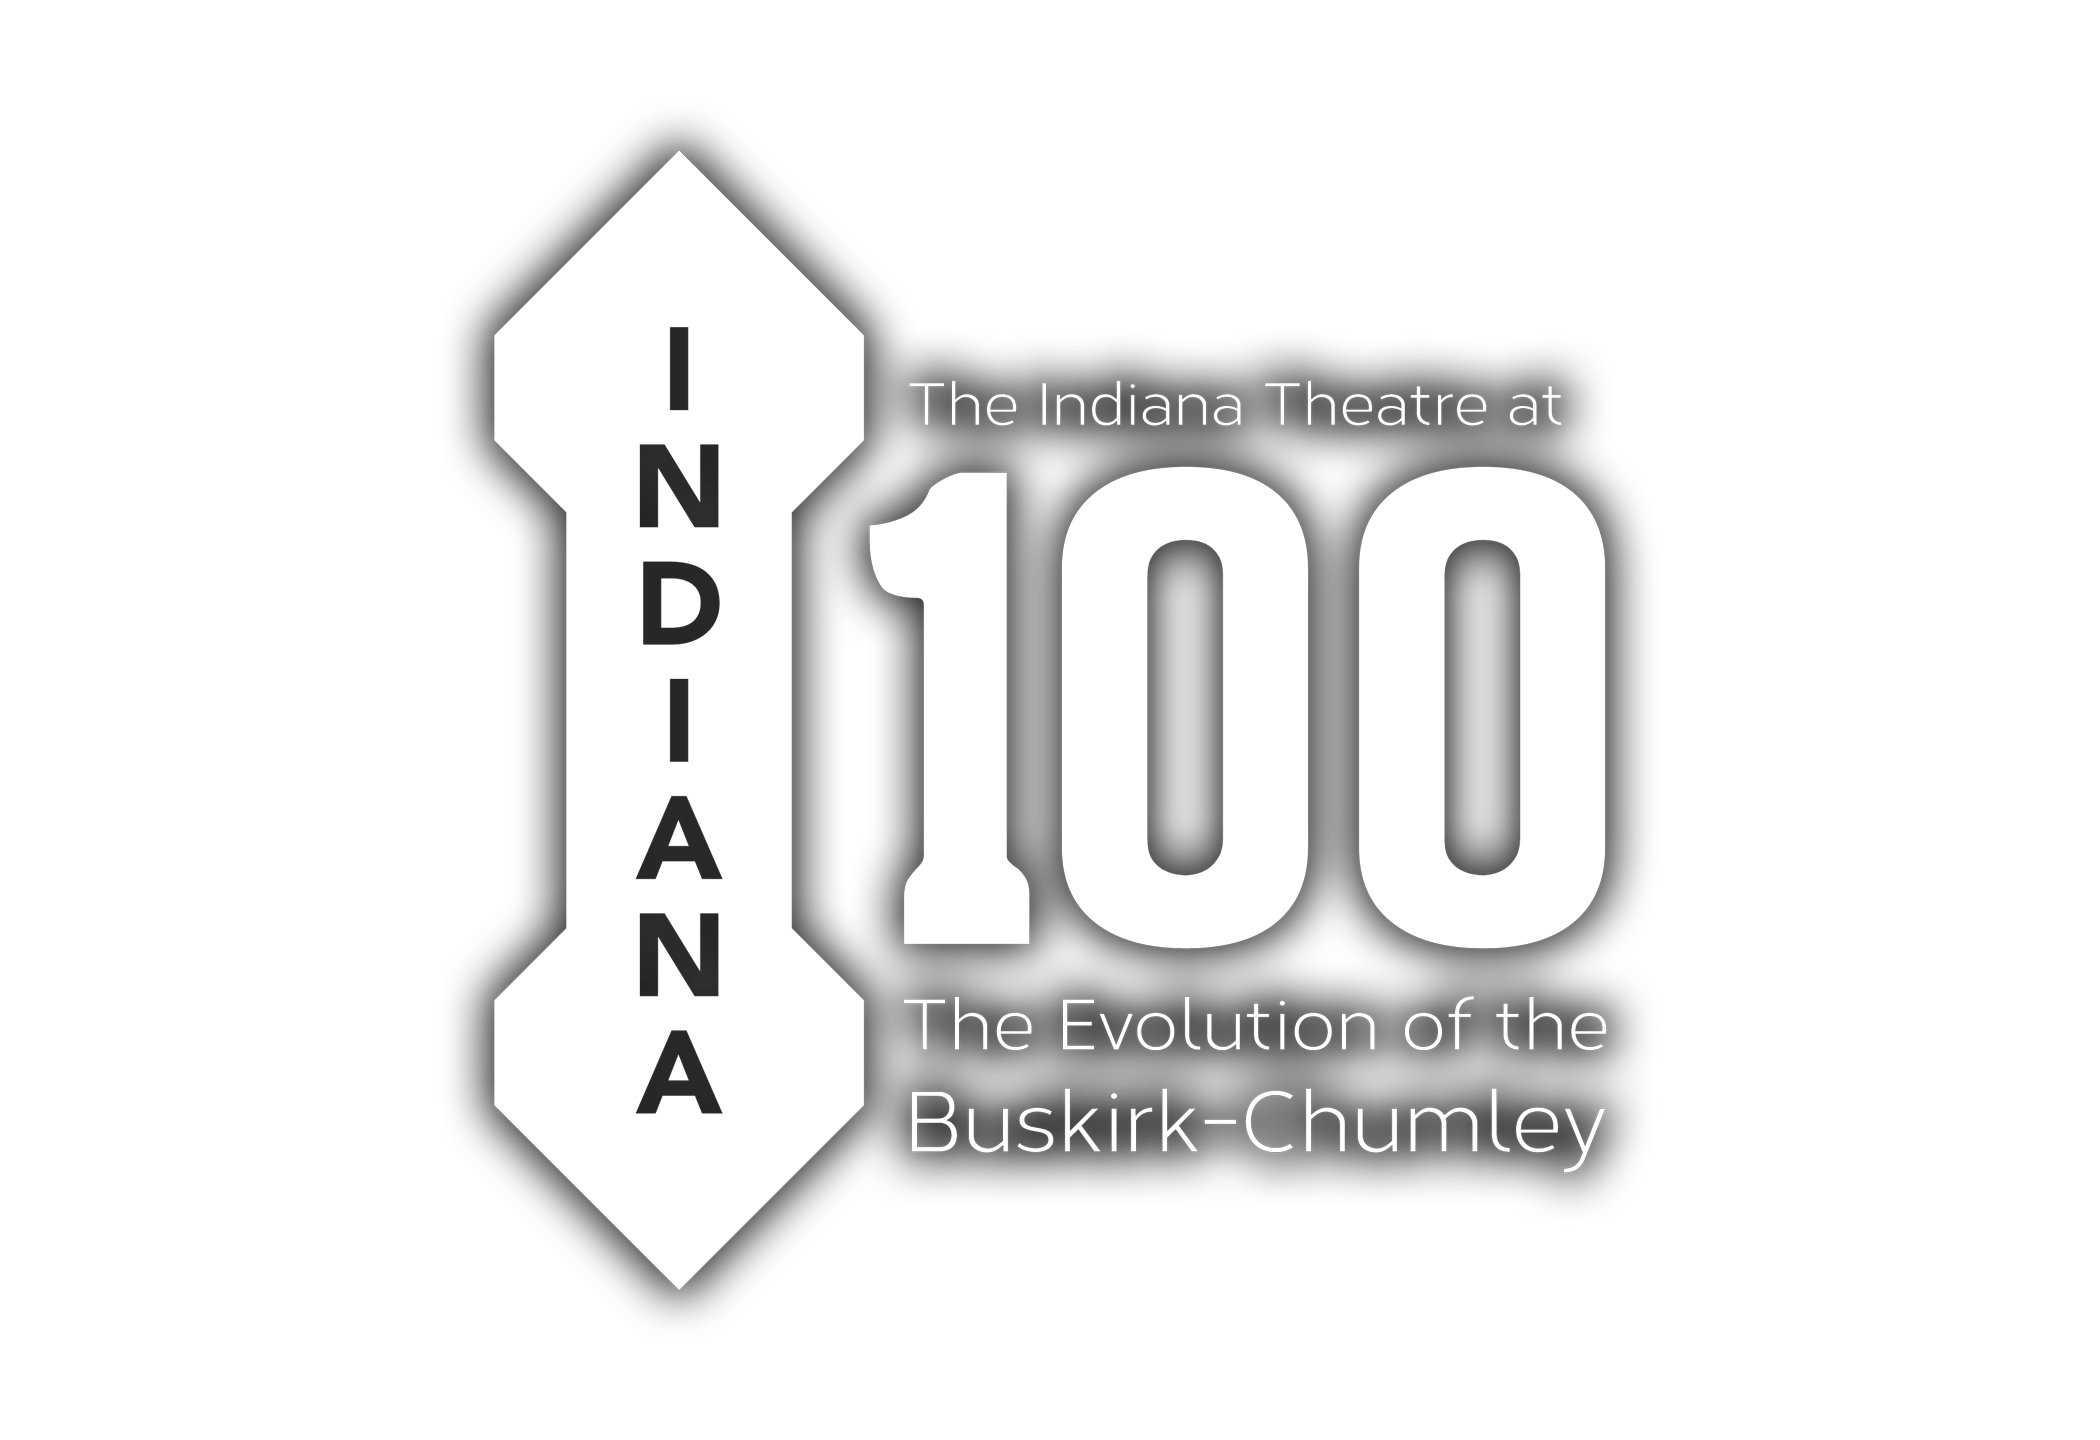 The Indiana Theatre at 100: The Evolution of the Buskirk-Chumley